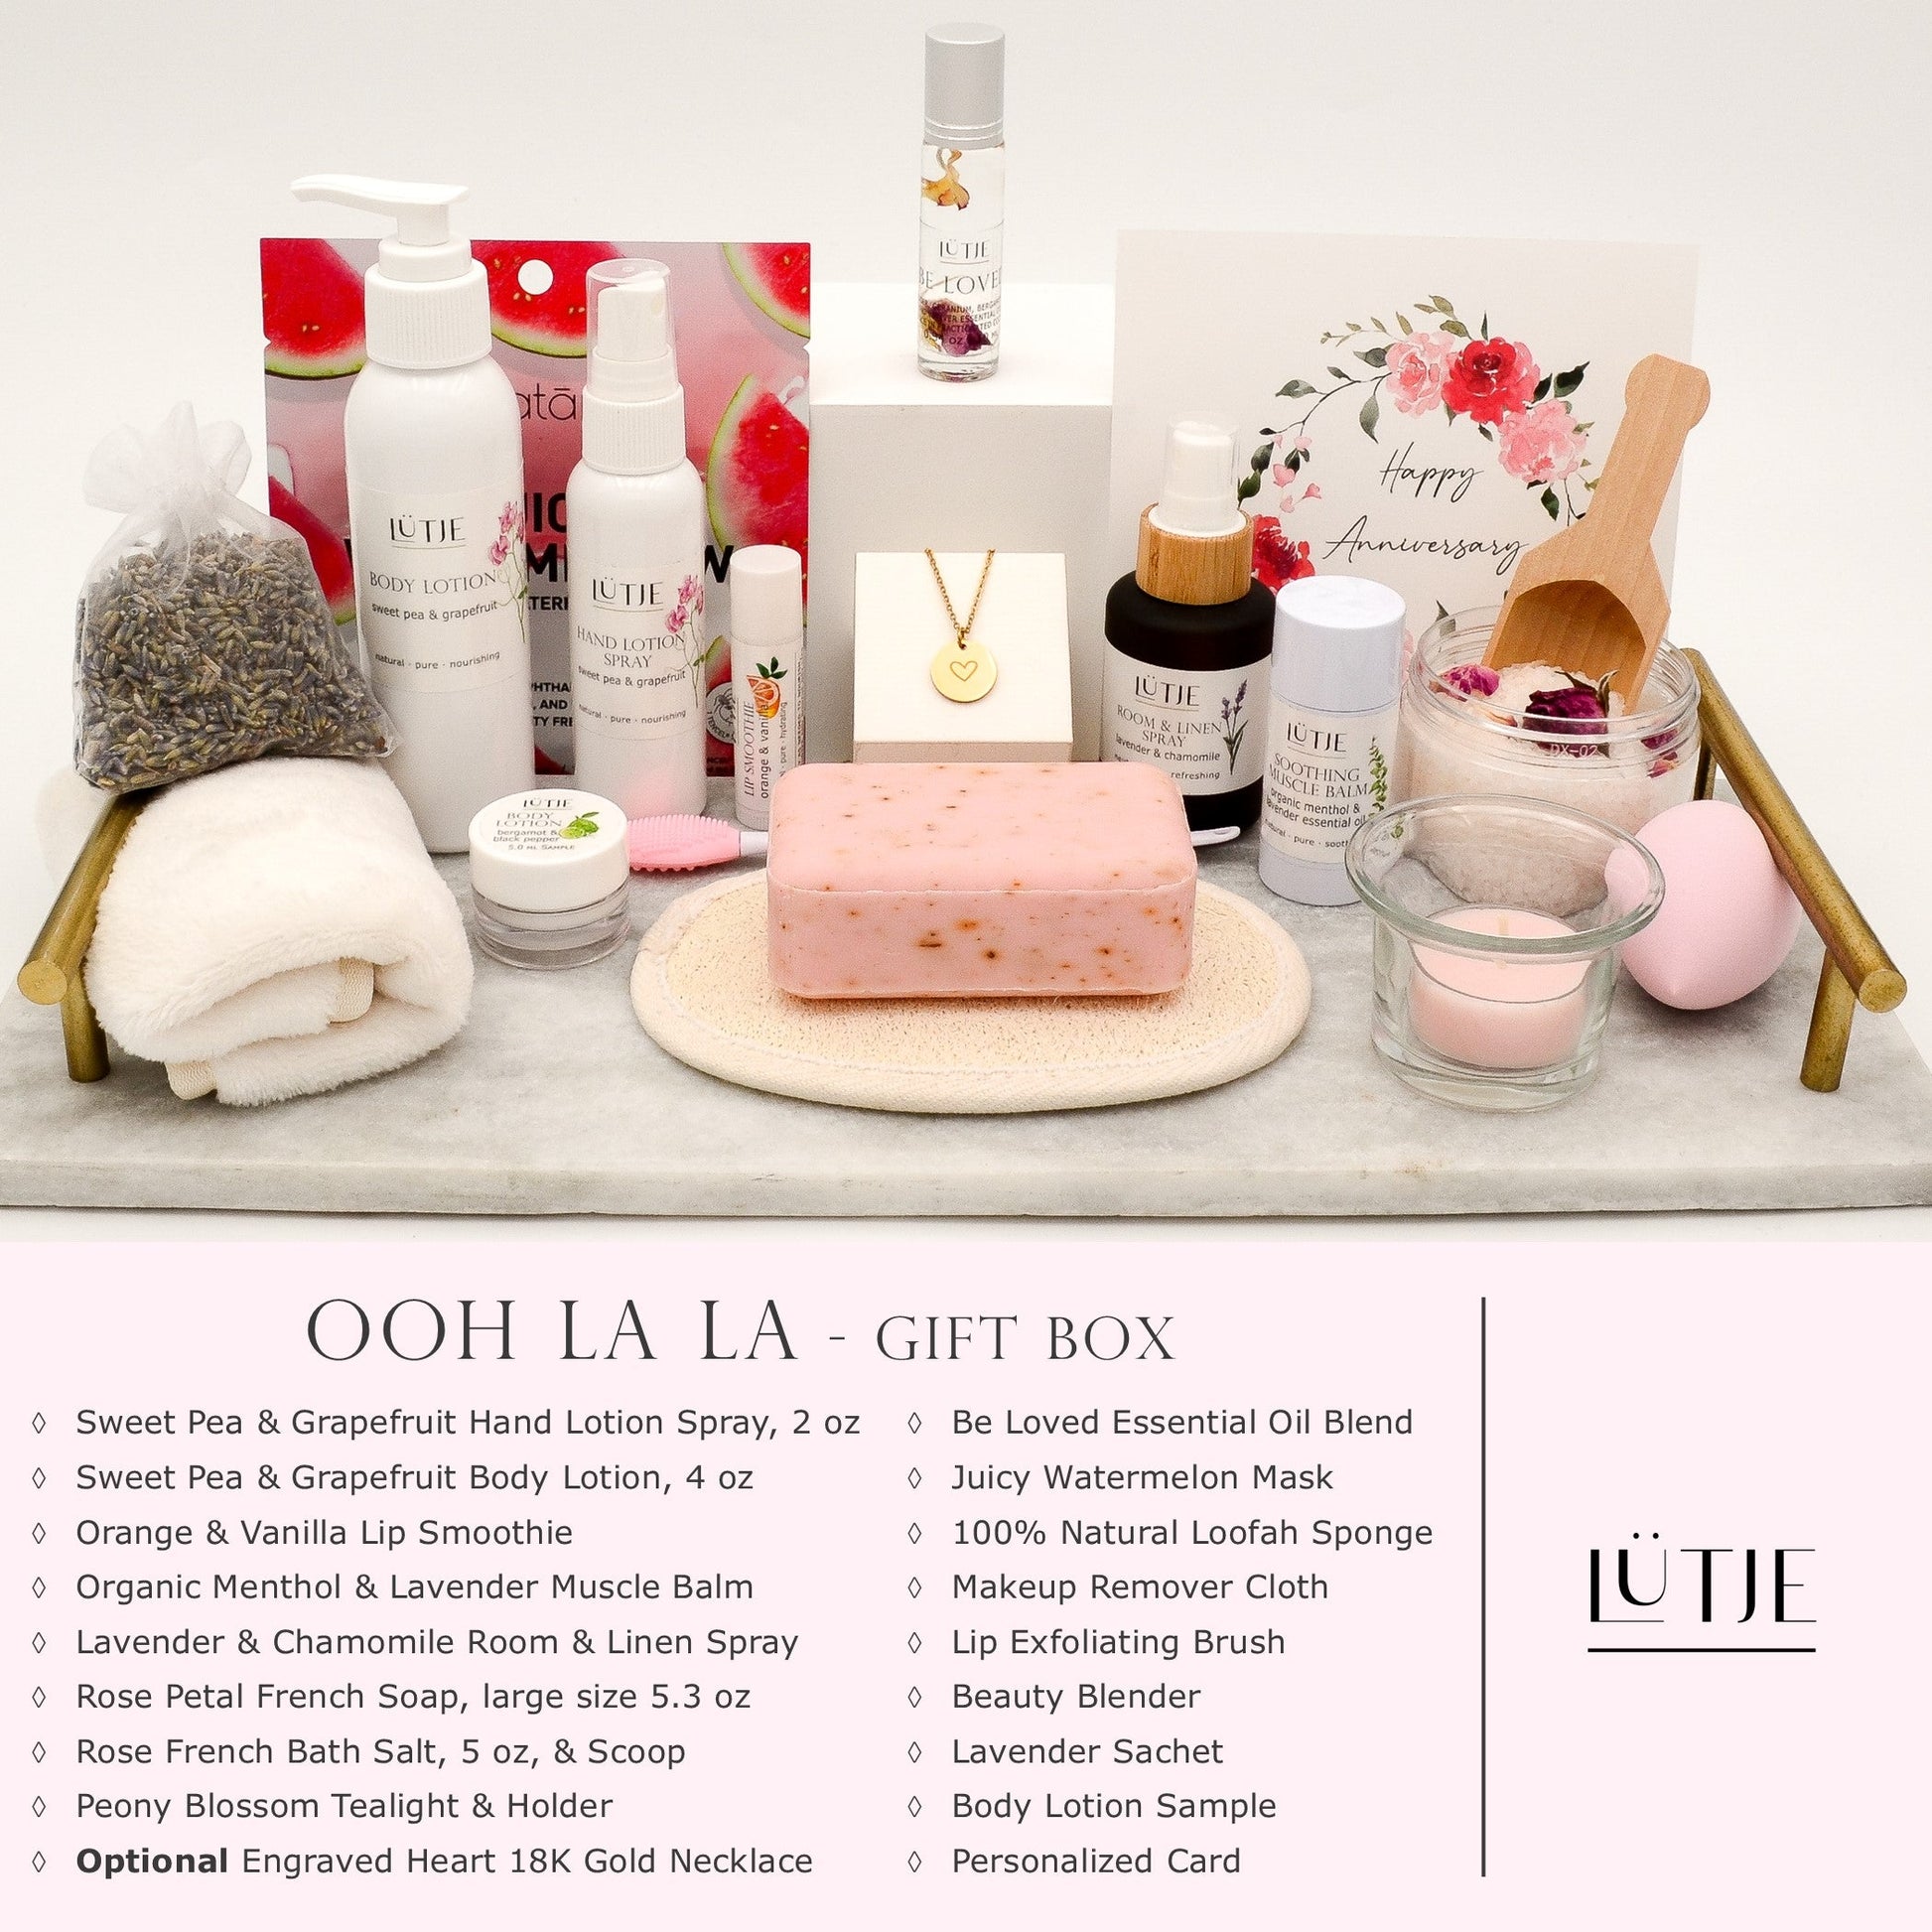 Ooh La La Gift Box for women, wife, daughter, BFF, sister, mom, or grandma, includes Sweet Pea & Grapefruit hand lotion spray and body lotion, essential oil, lip balm, soothing muscle balm, Lavender & Chamomile room & linen spray, French soap, French bath salts, hydrating face mask, other bath, spa and self-care items, and 18K gold-plated necklace with engraved heart.